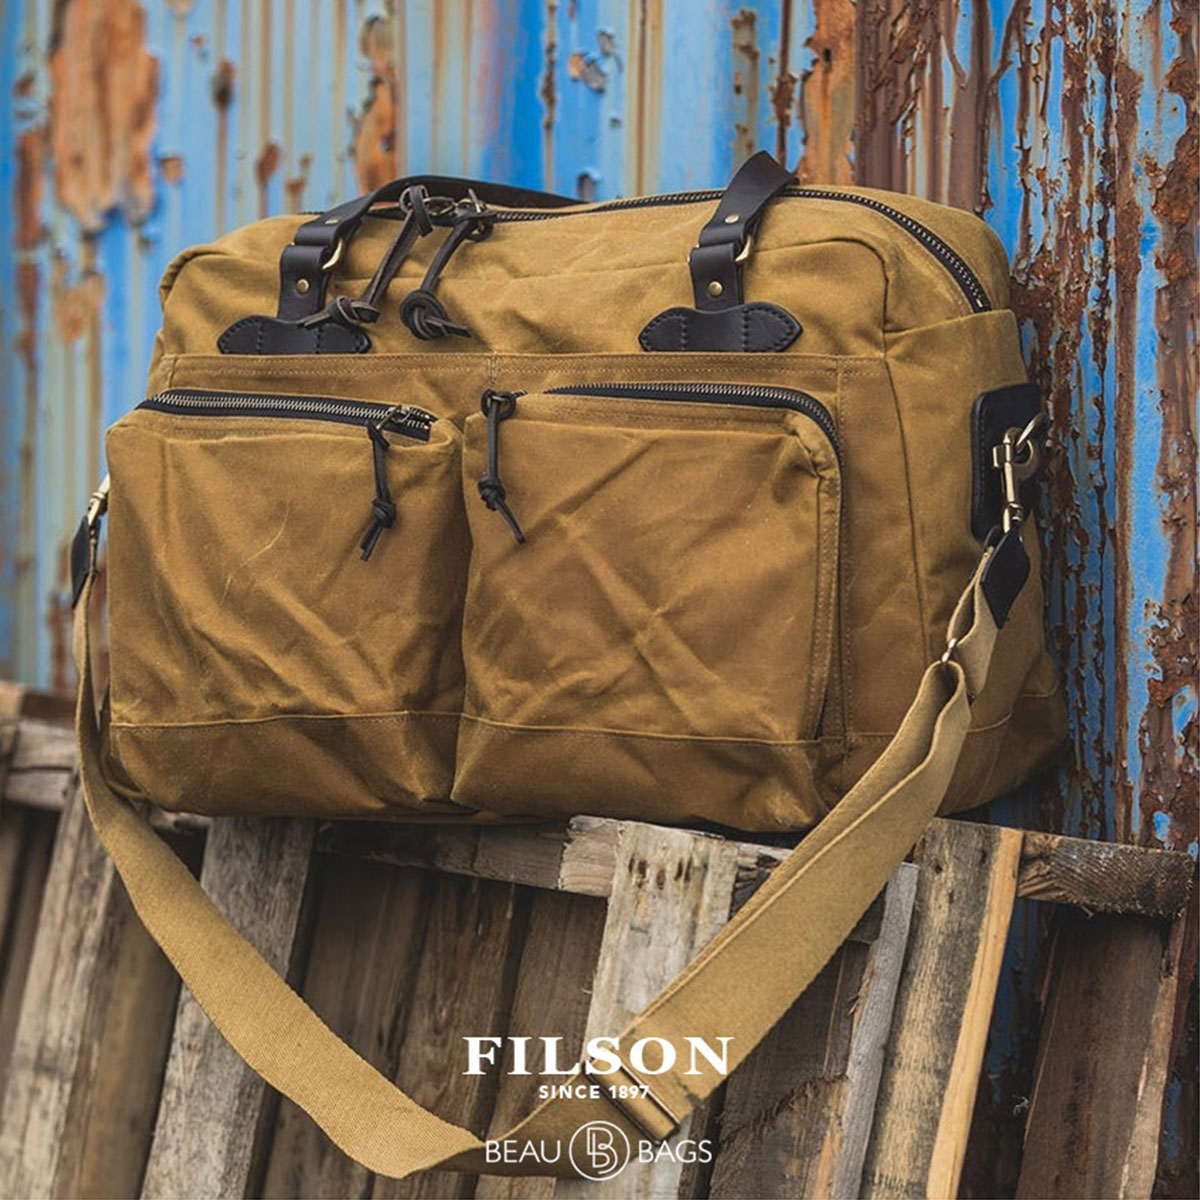 Filson 48-Hour Tin Cloth Duffle Bag Dark Tan, a well built and robust duffle with great pockets for a long weekend away